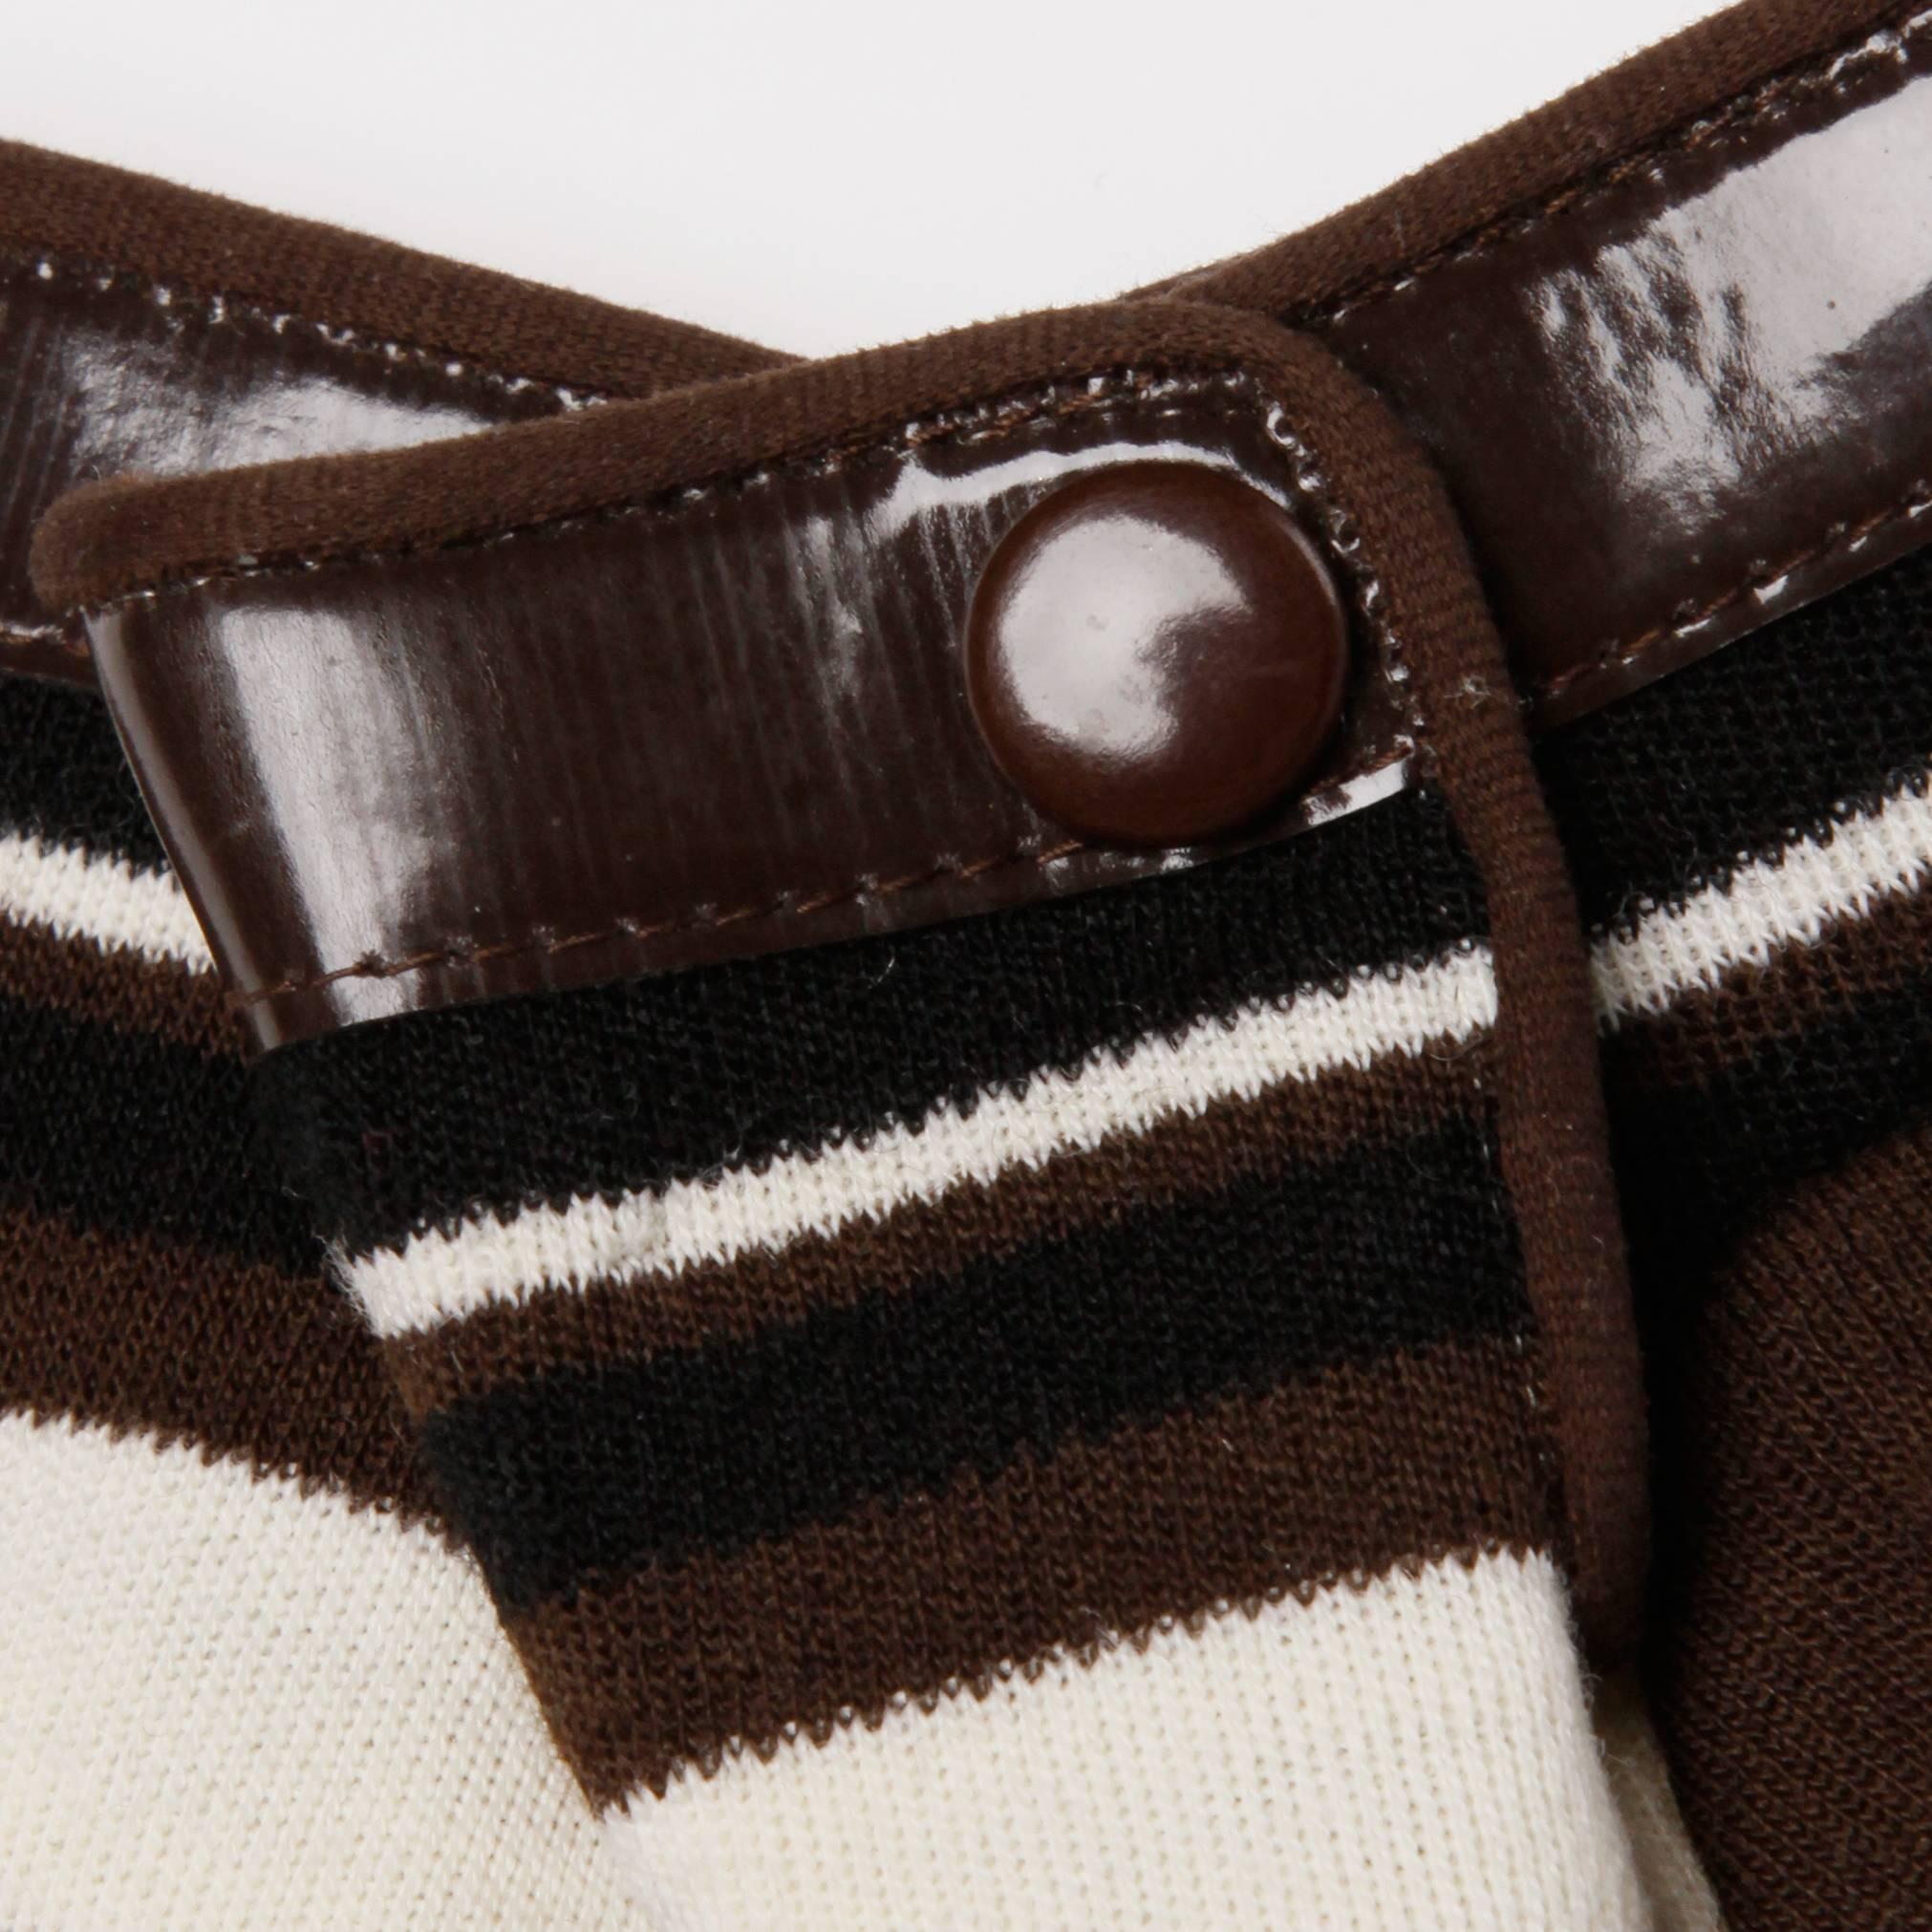 Gorgeous vintage Pierre Cardin gloves with brown vinyl trim. Gloves are wool knit in brown, black and off white stripes. Unlined. Marked size 3. Fits like a modern size medium.